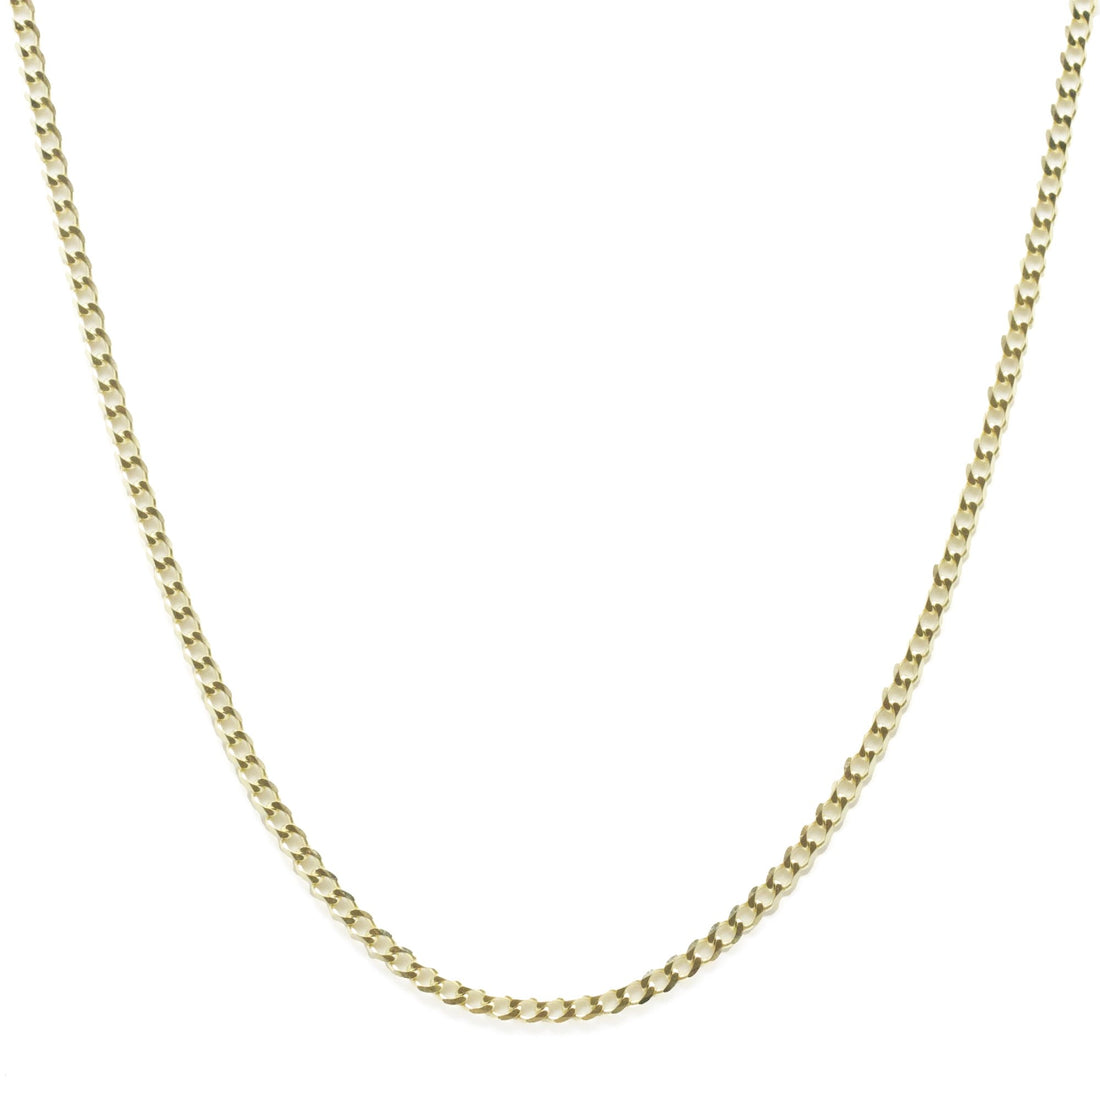 10K Gold Bevelled Curb Chain 22"